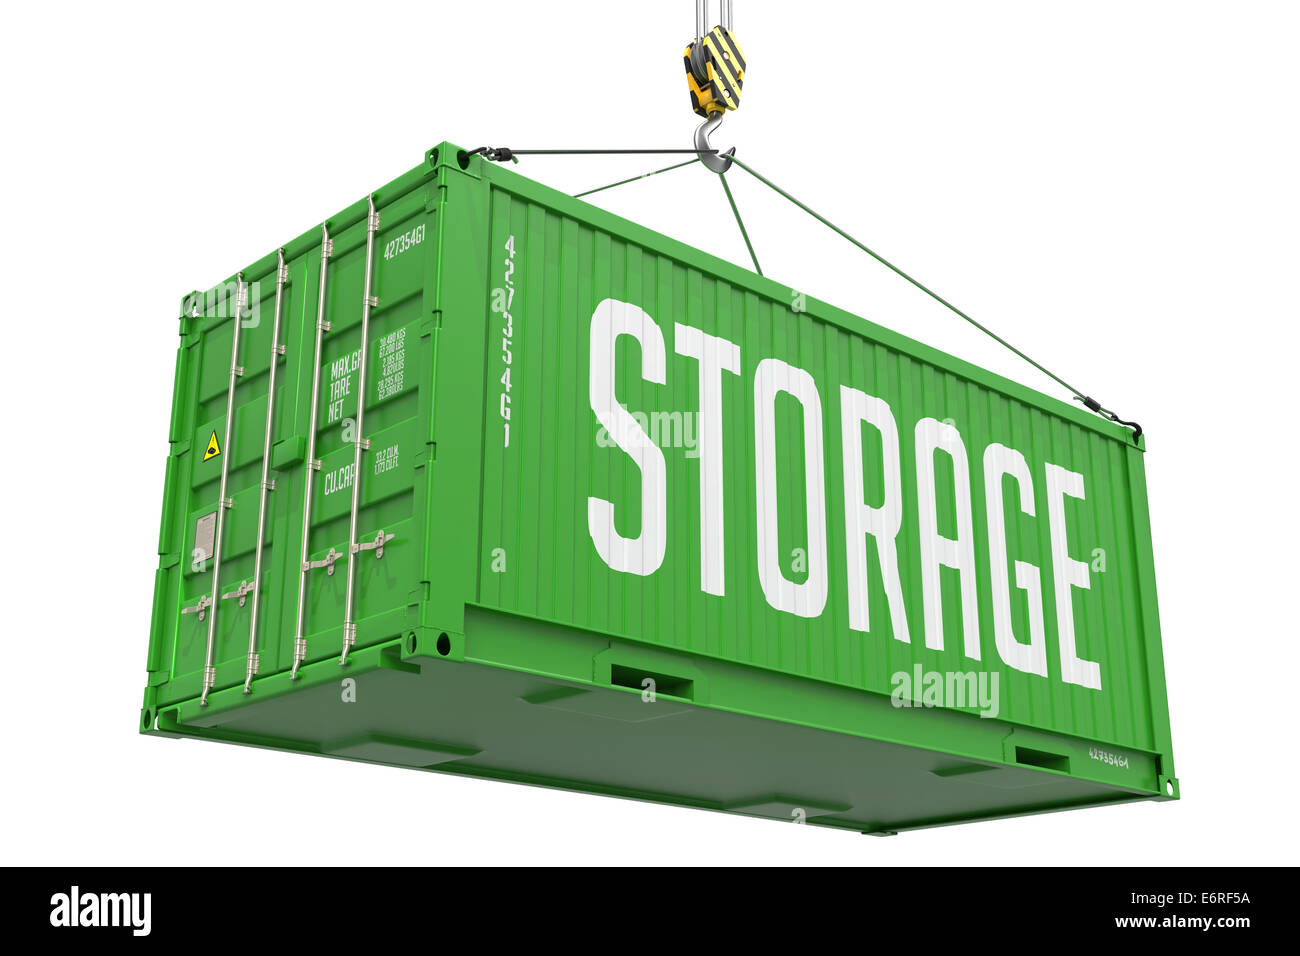 Storage - Green Hanging Cargo Container. Stock Photo